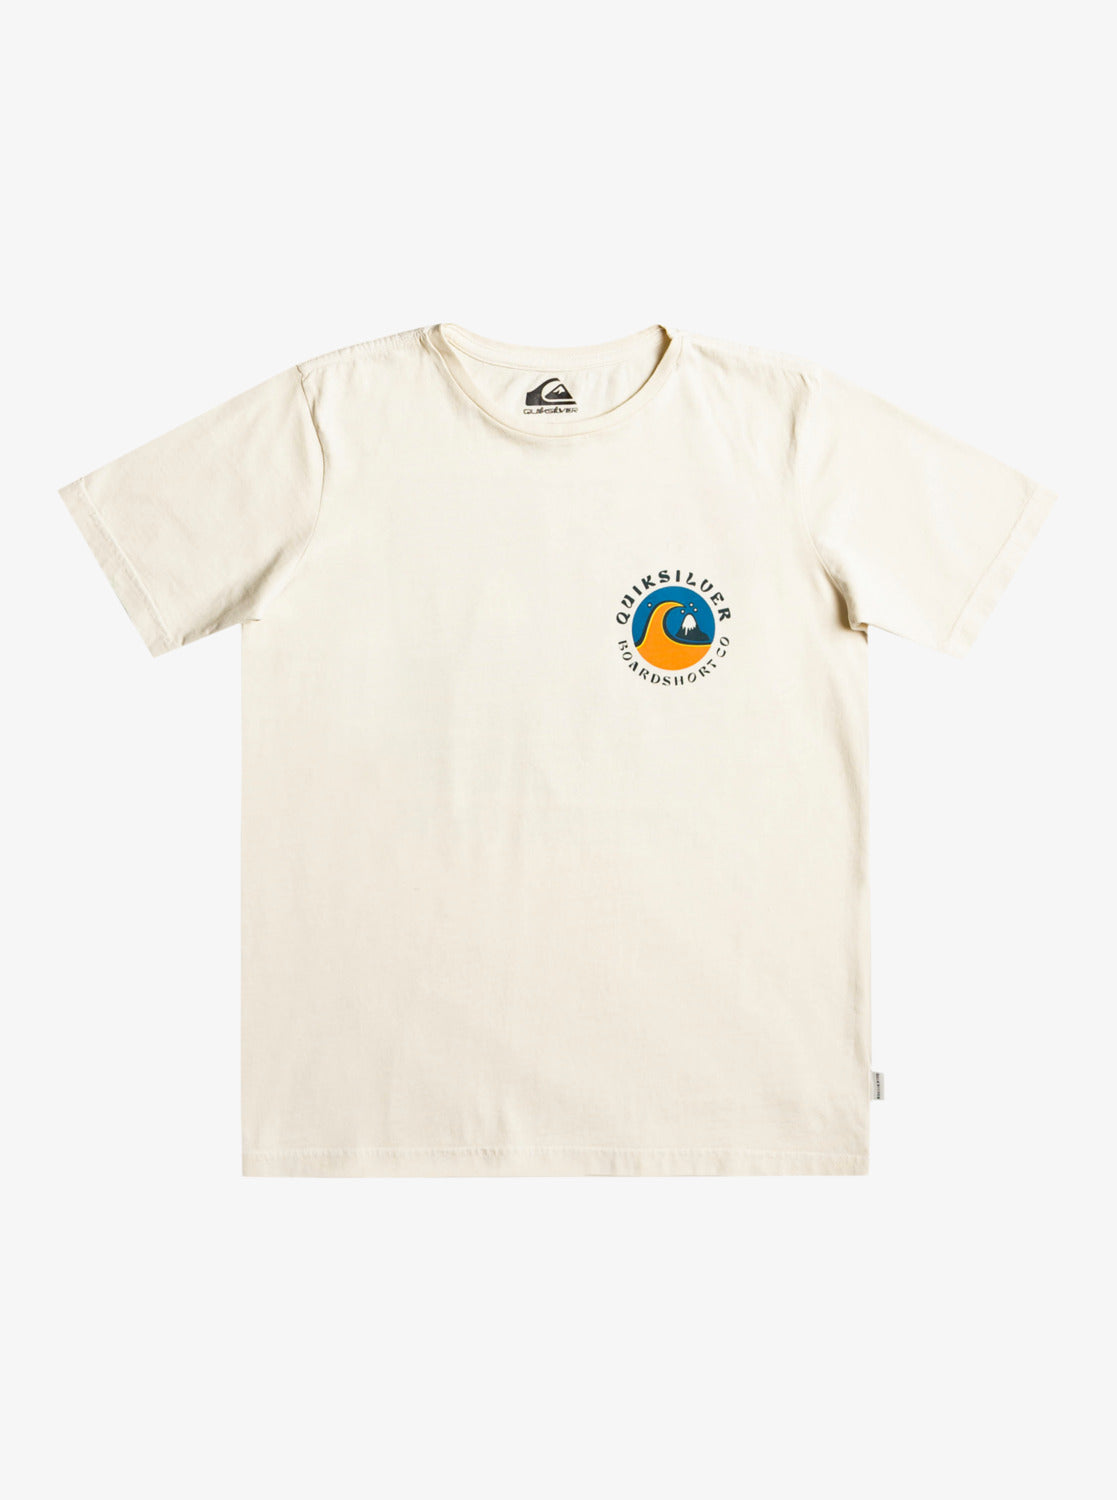 Quiksilver Bubble Stamp SS Tee.